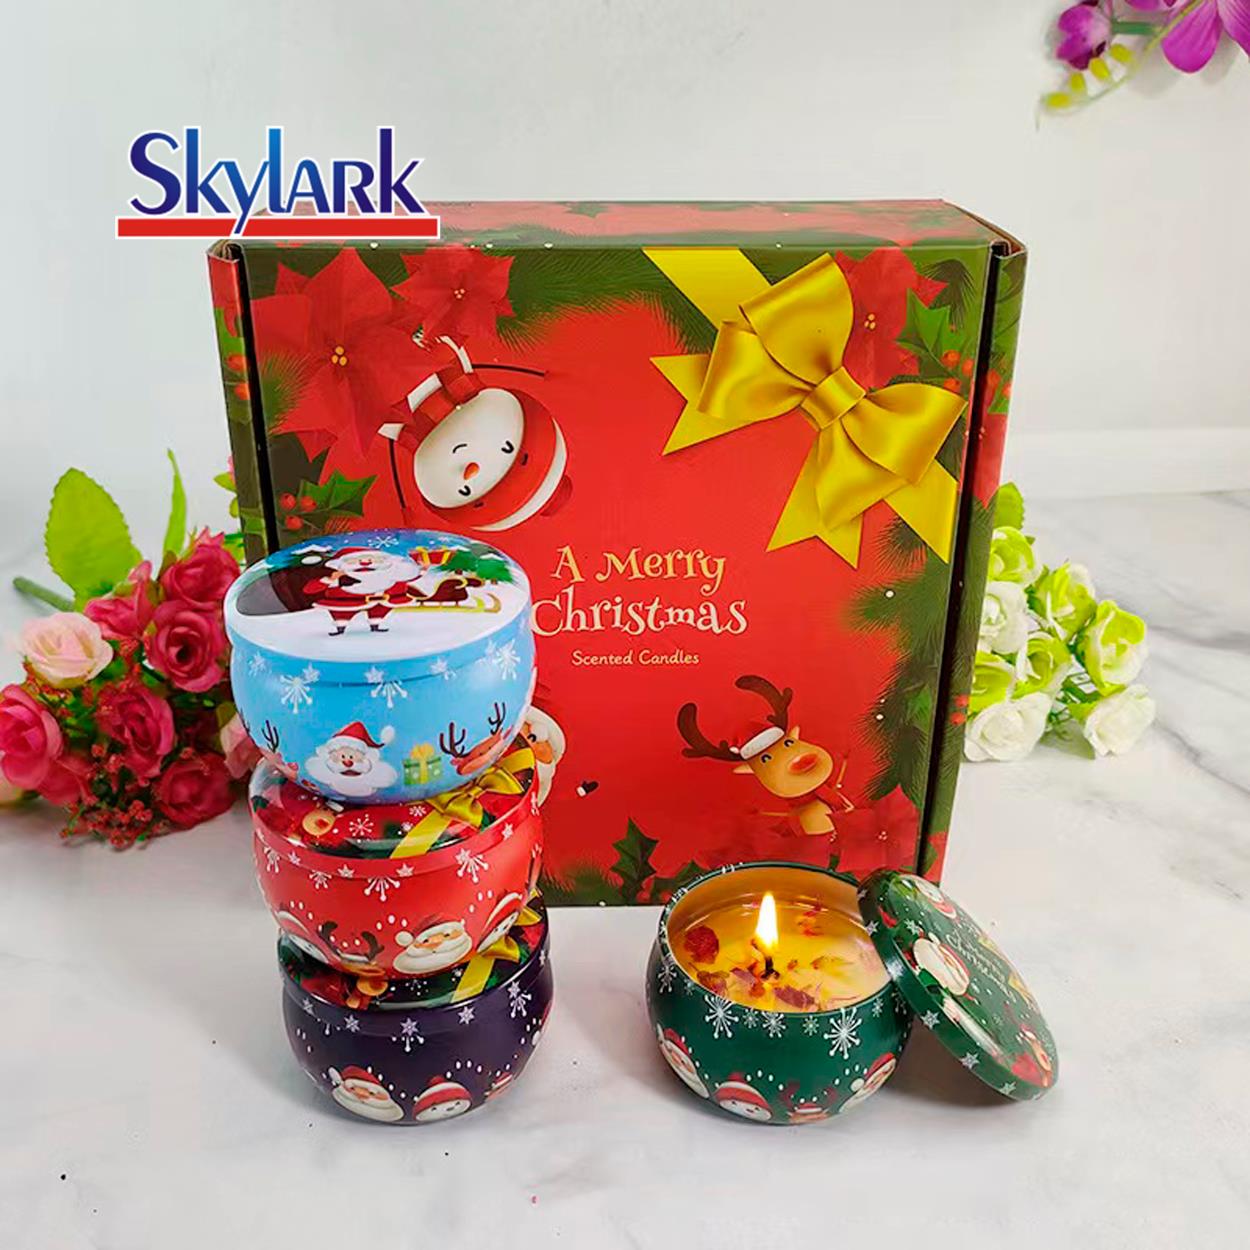 Professional Christmas Candles odorated Gift Set With Excellent Performance